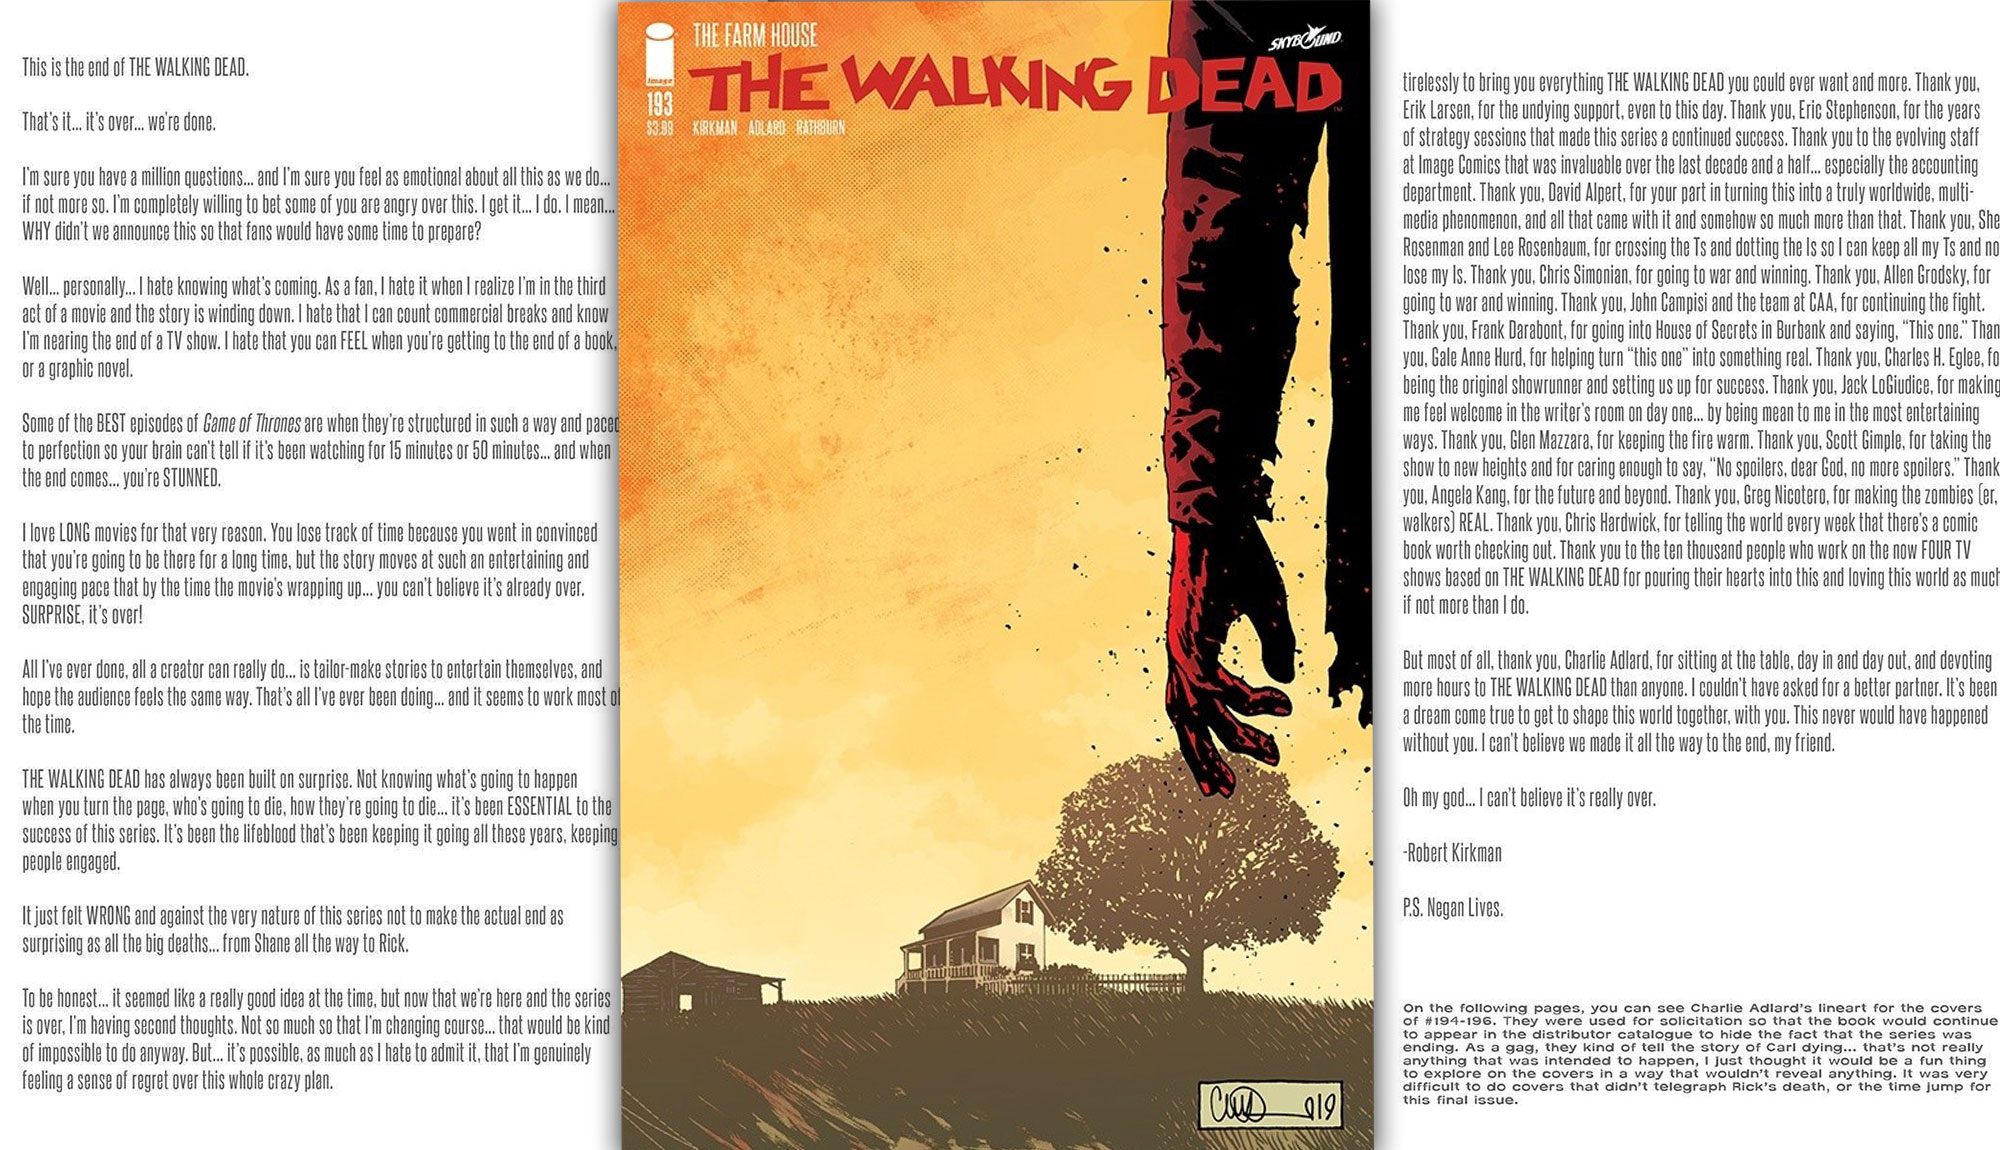 ROBERT KIRKMAN NM series finale Details about   THE WALKING DEAD #193 IMAGE 2nd Printing 